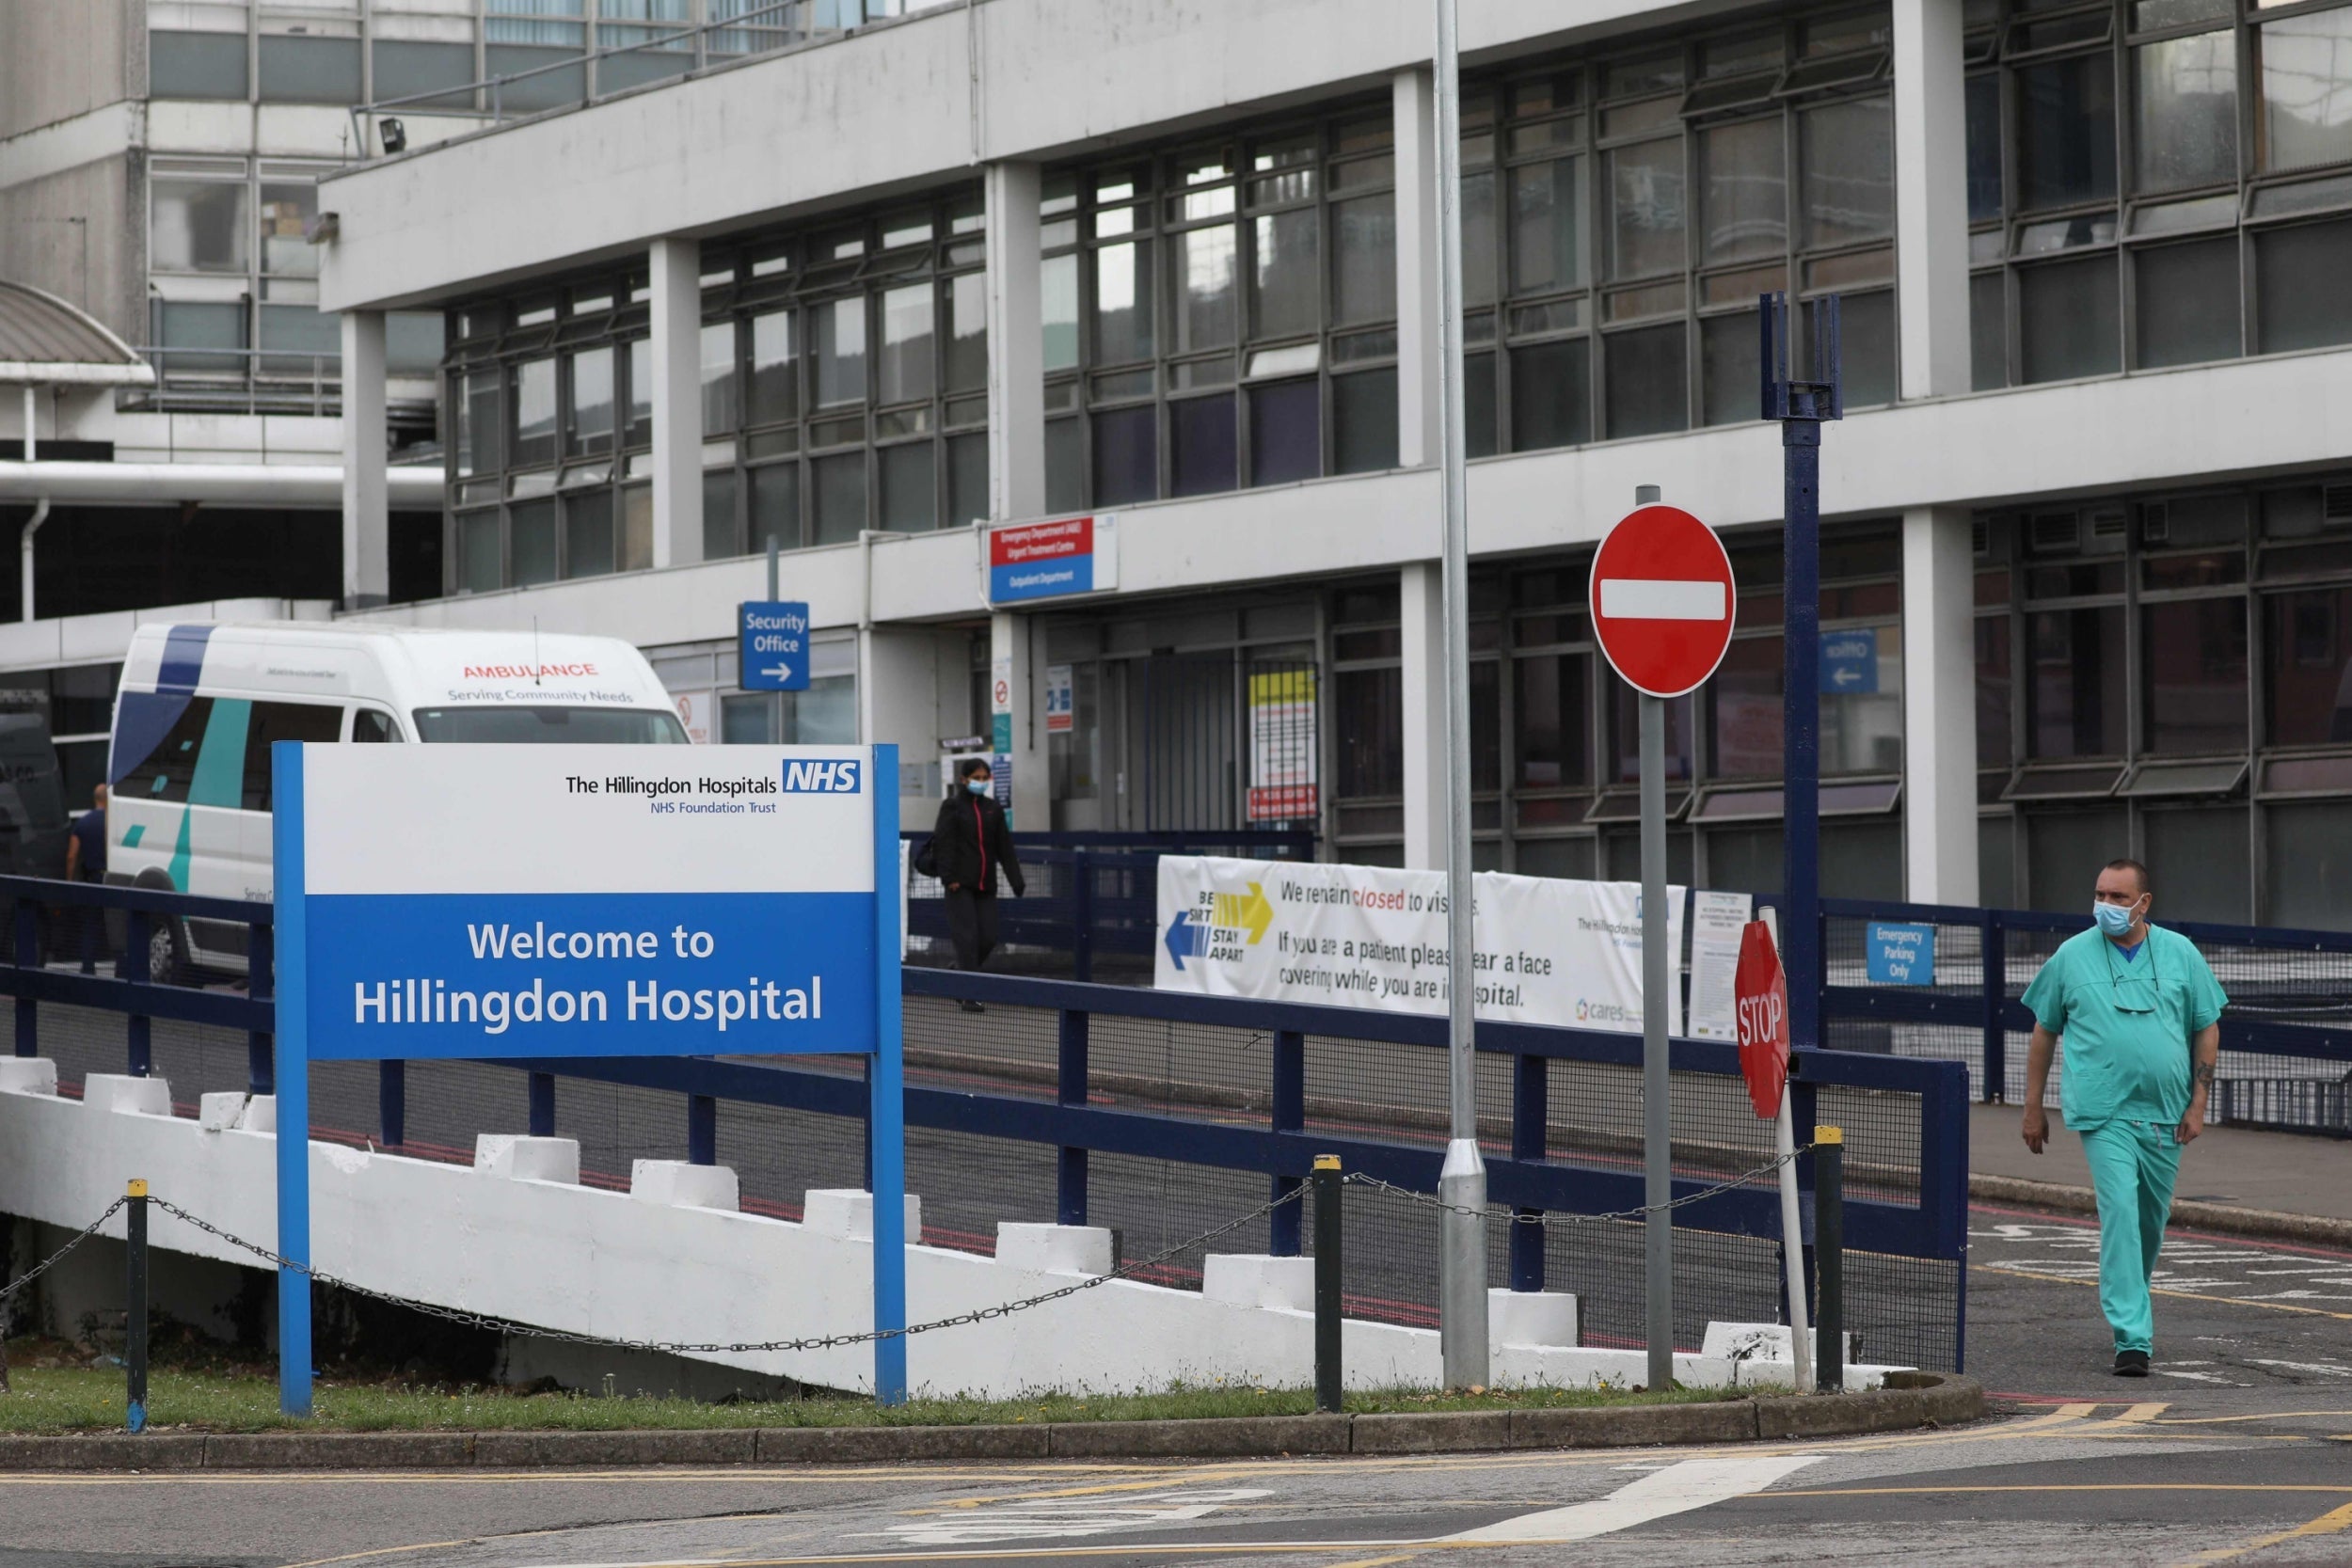 Hillingdon hospital in west London has closed its A&E to emergency patients due to an outbreak of Covid-19